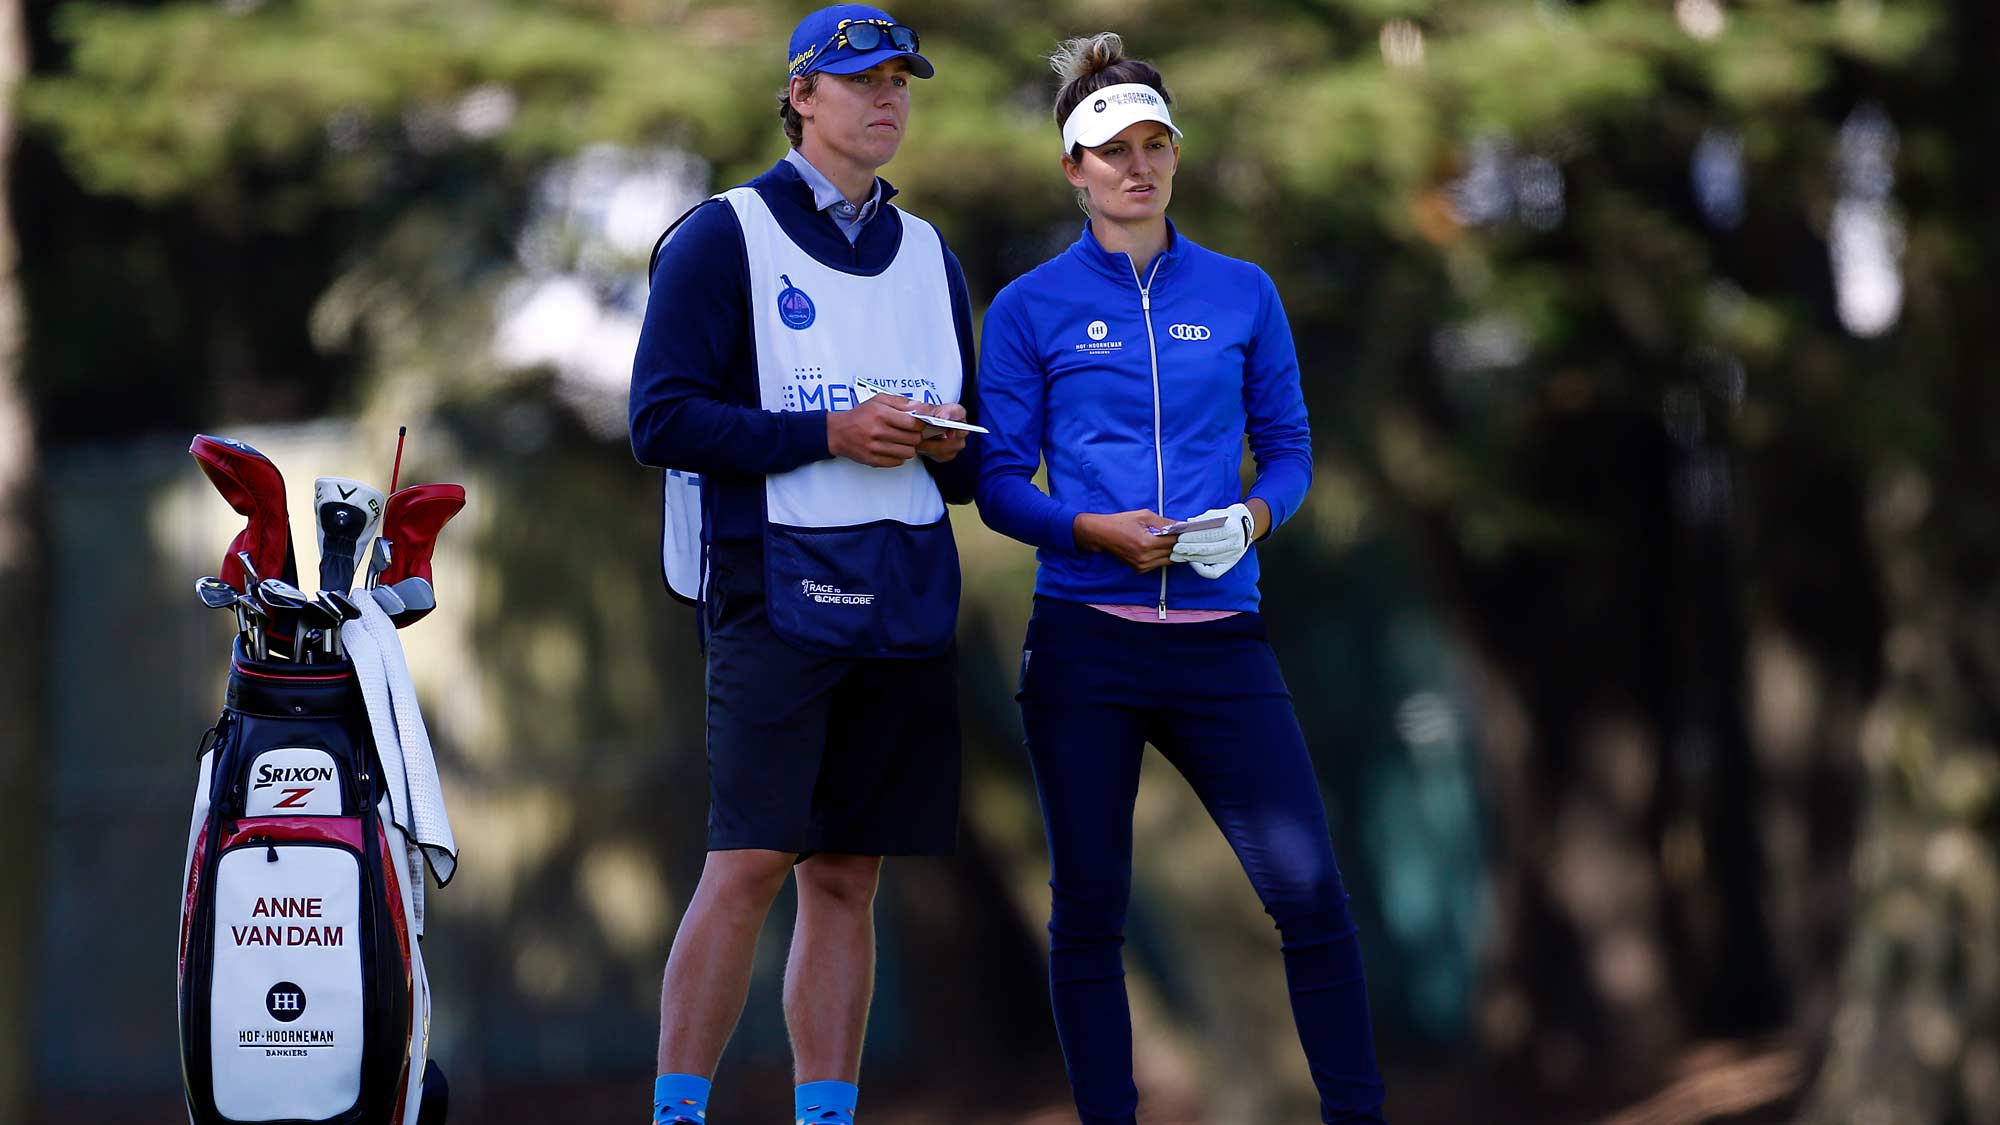 Anne van Dam of the Netherlands talks to her caddie on the 18th hole during the first round of the LPGA Mediheal Championship